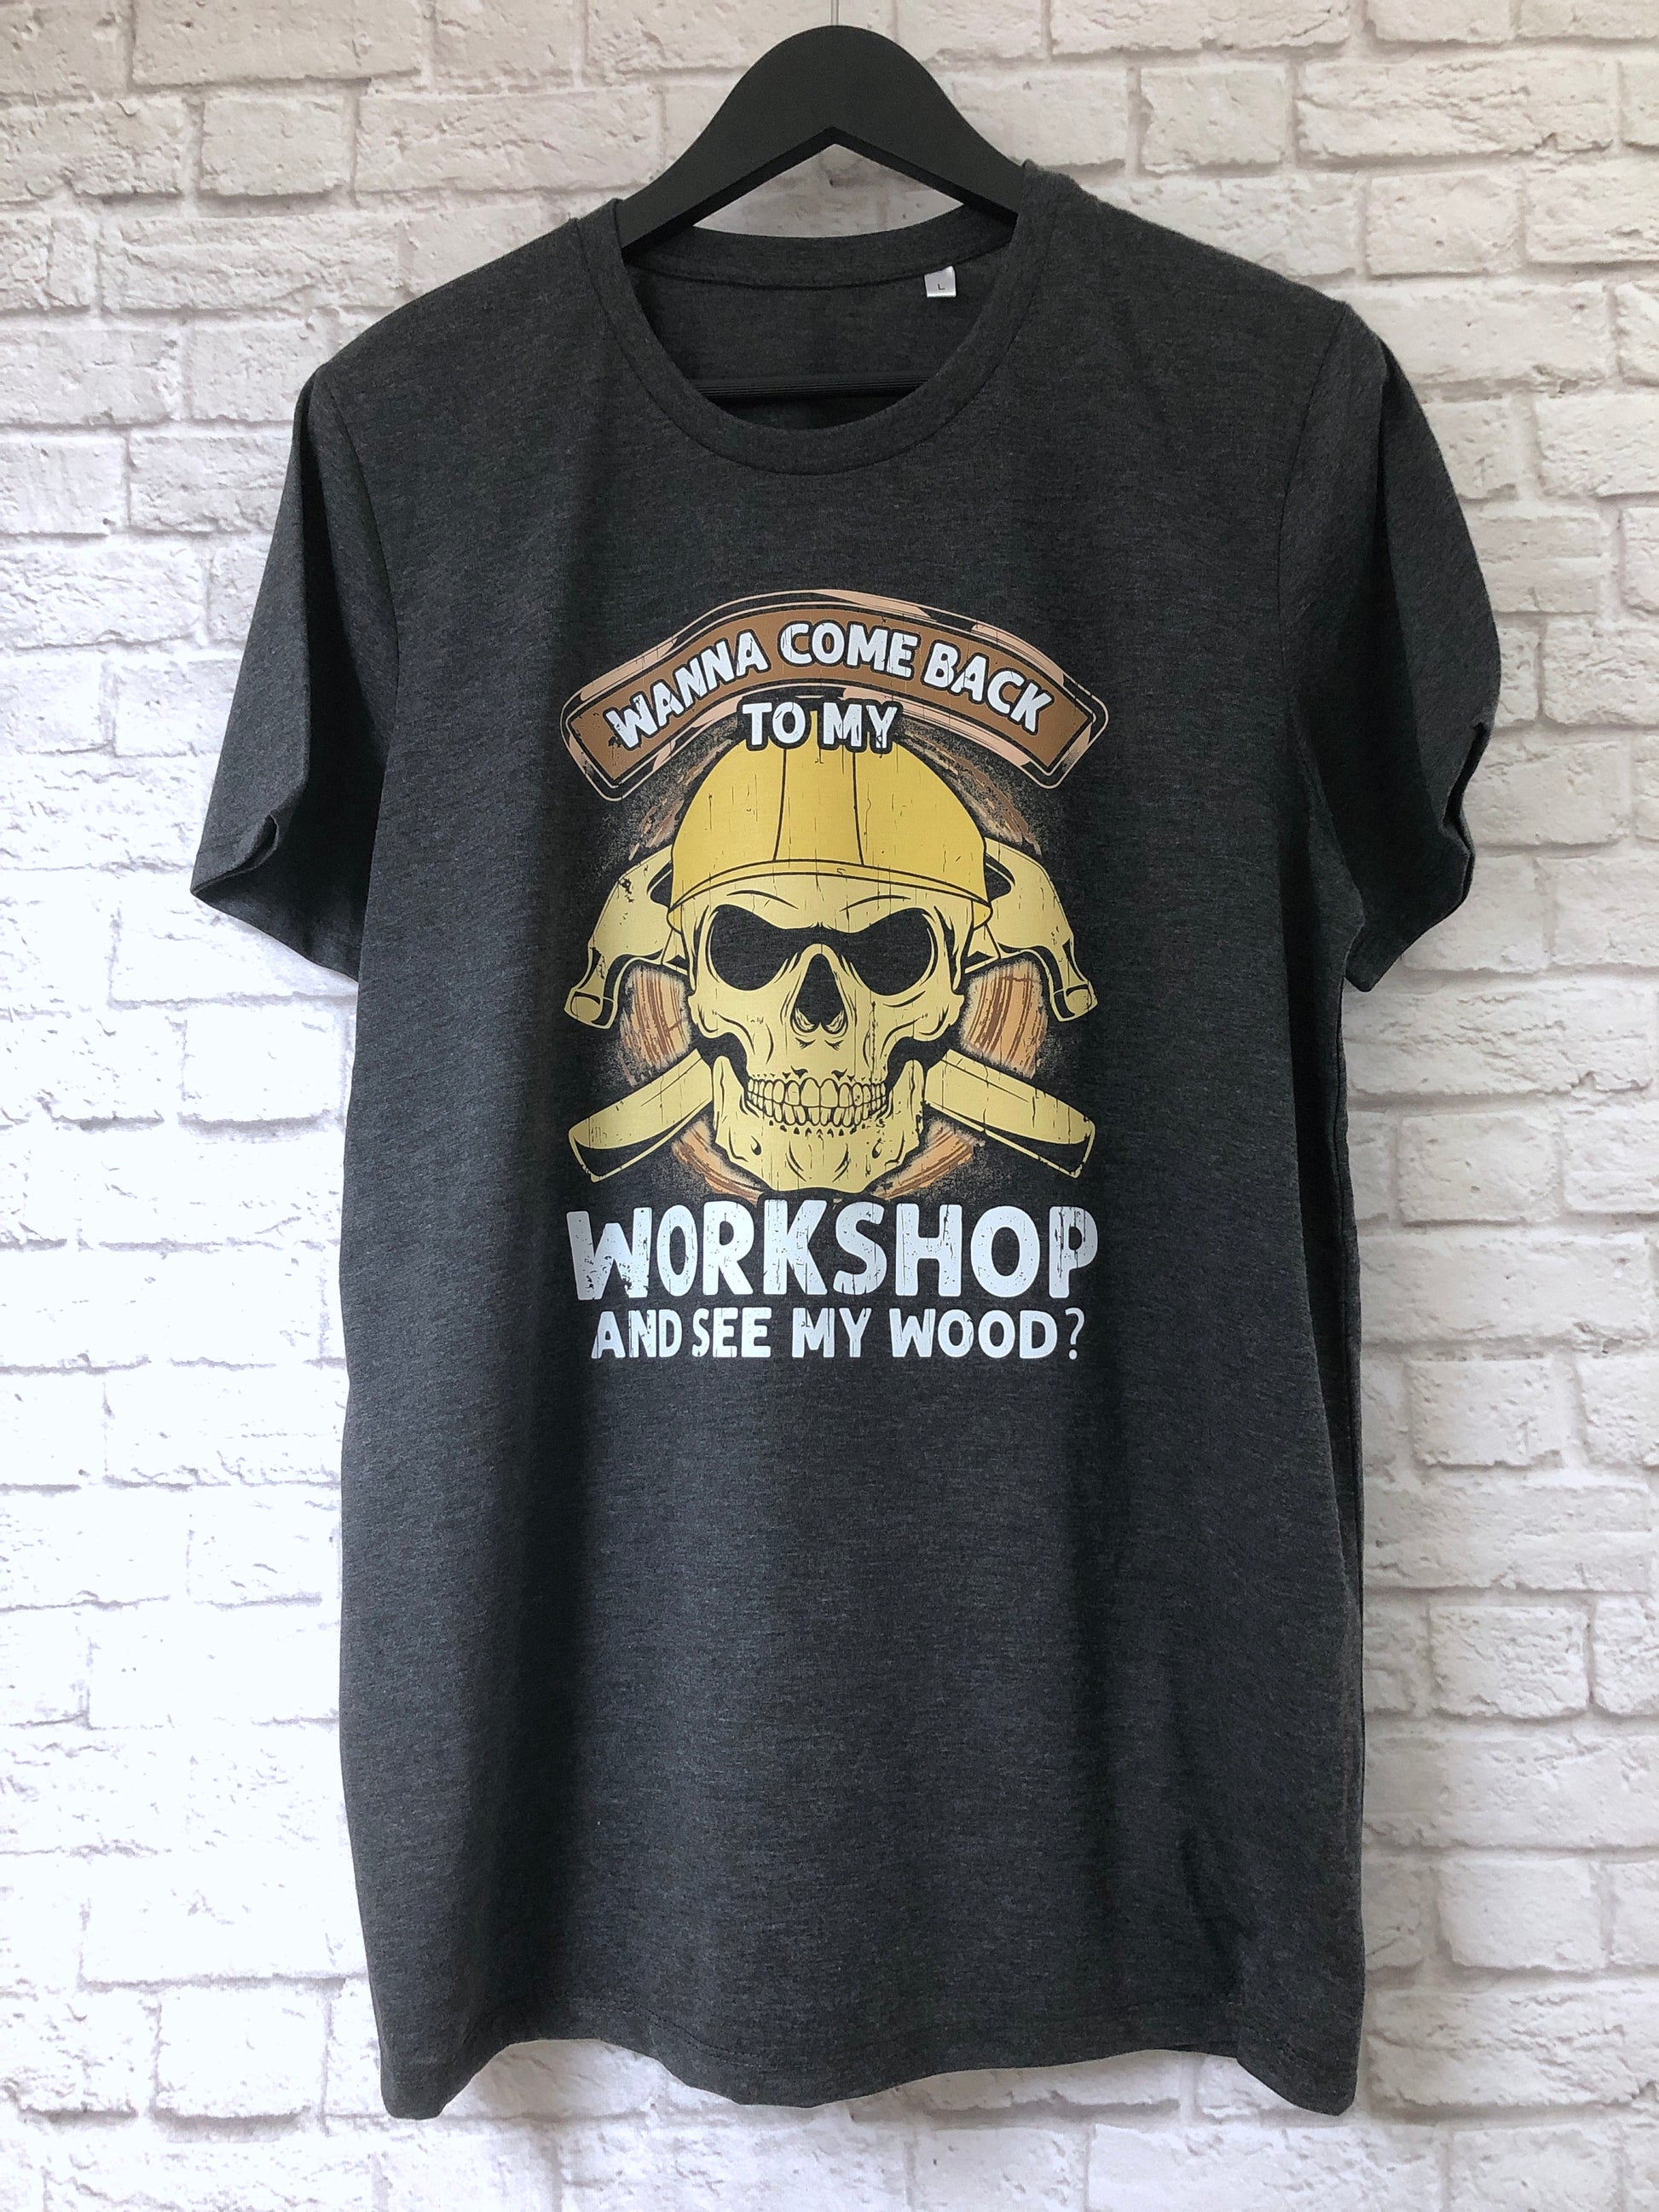 Funny Woodwork T-Shirt, Carpenter Gift Idea, Humorous Graphic Print Tee Shirt Top, Wanna Come Back To My Workshop And See My Wood? Meme